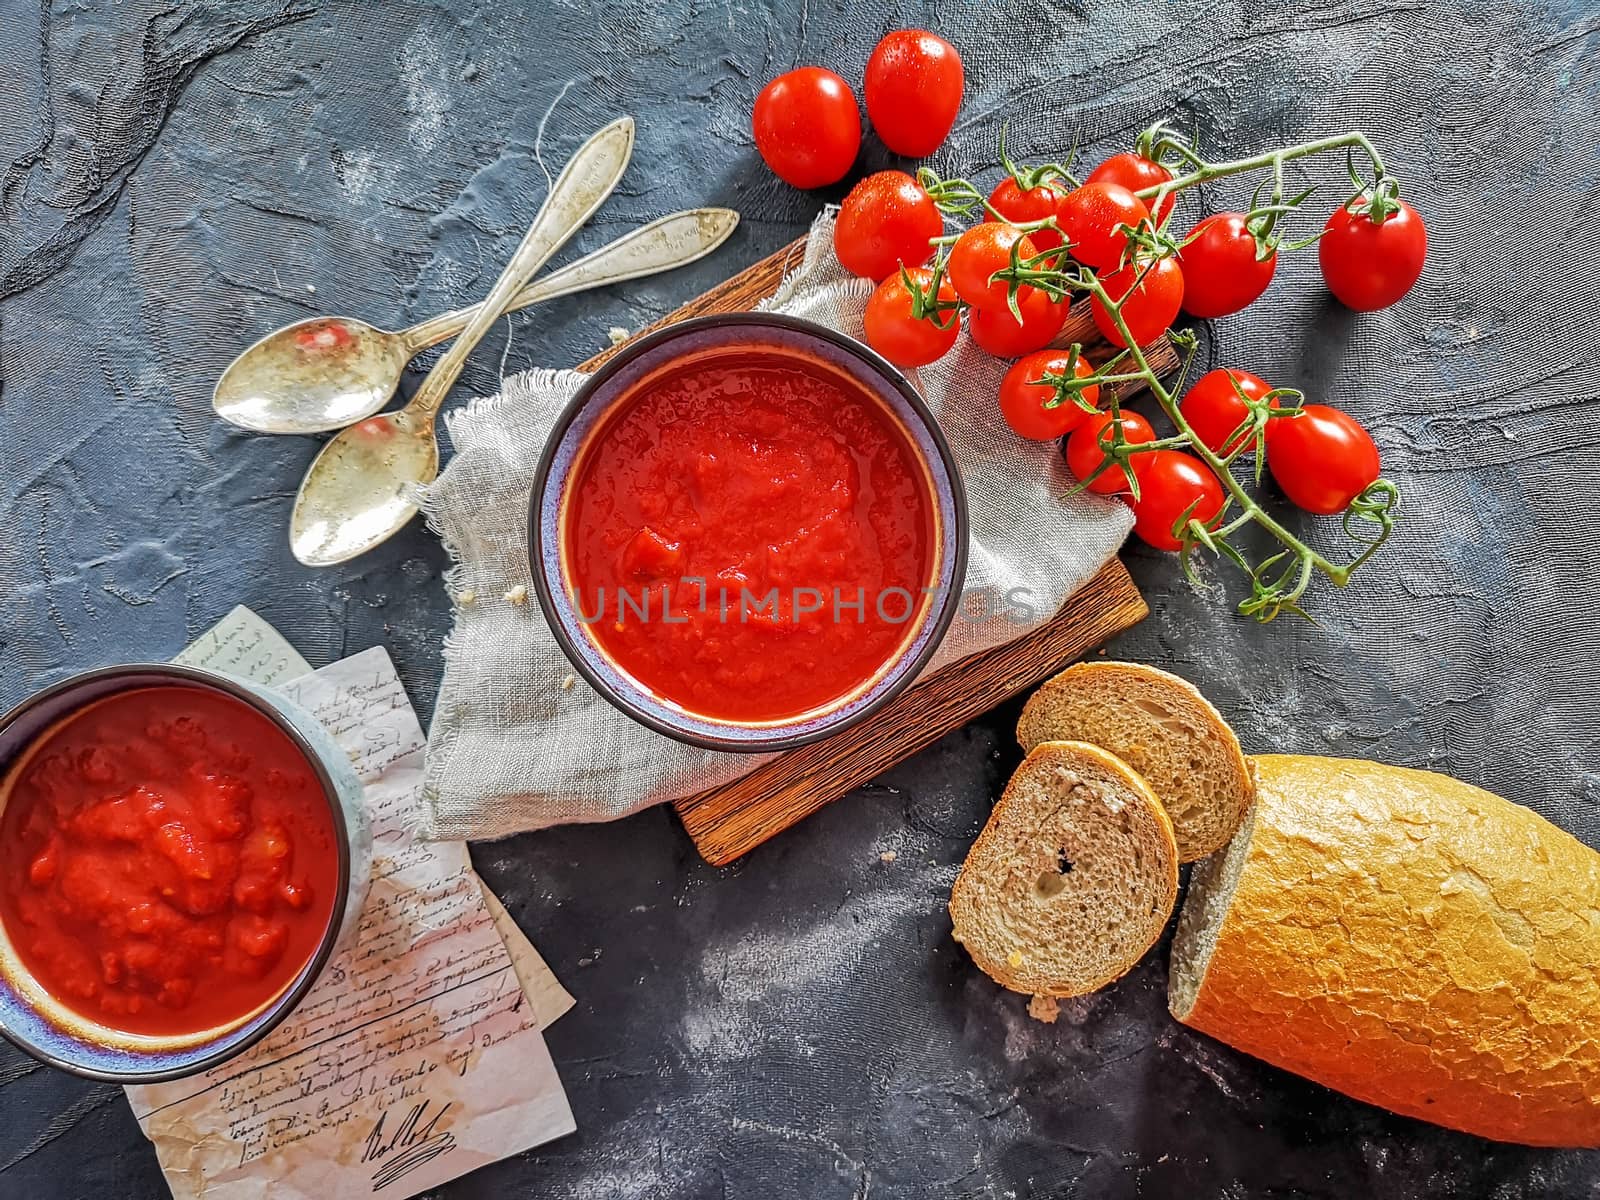 Flat lay of tomato soup with paper notes, bread, old spoons and cherry tomatoes by Wierzchu